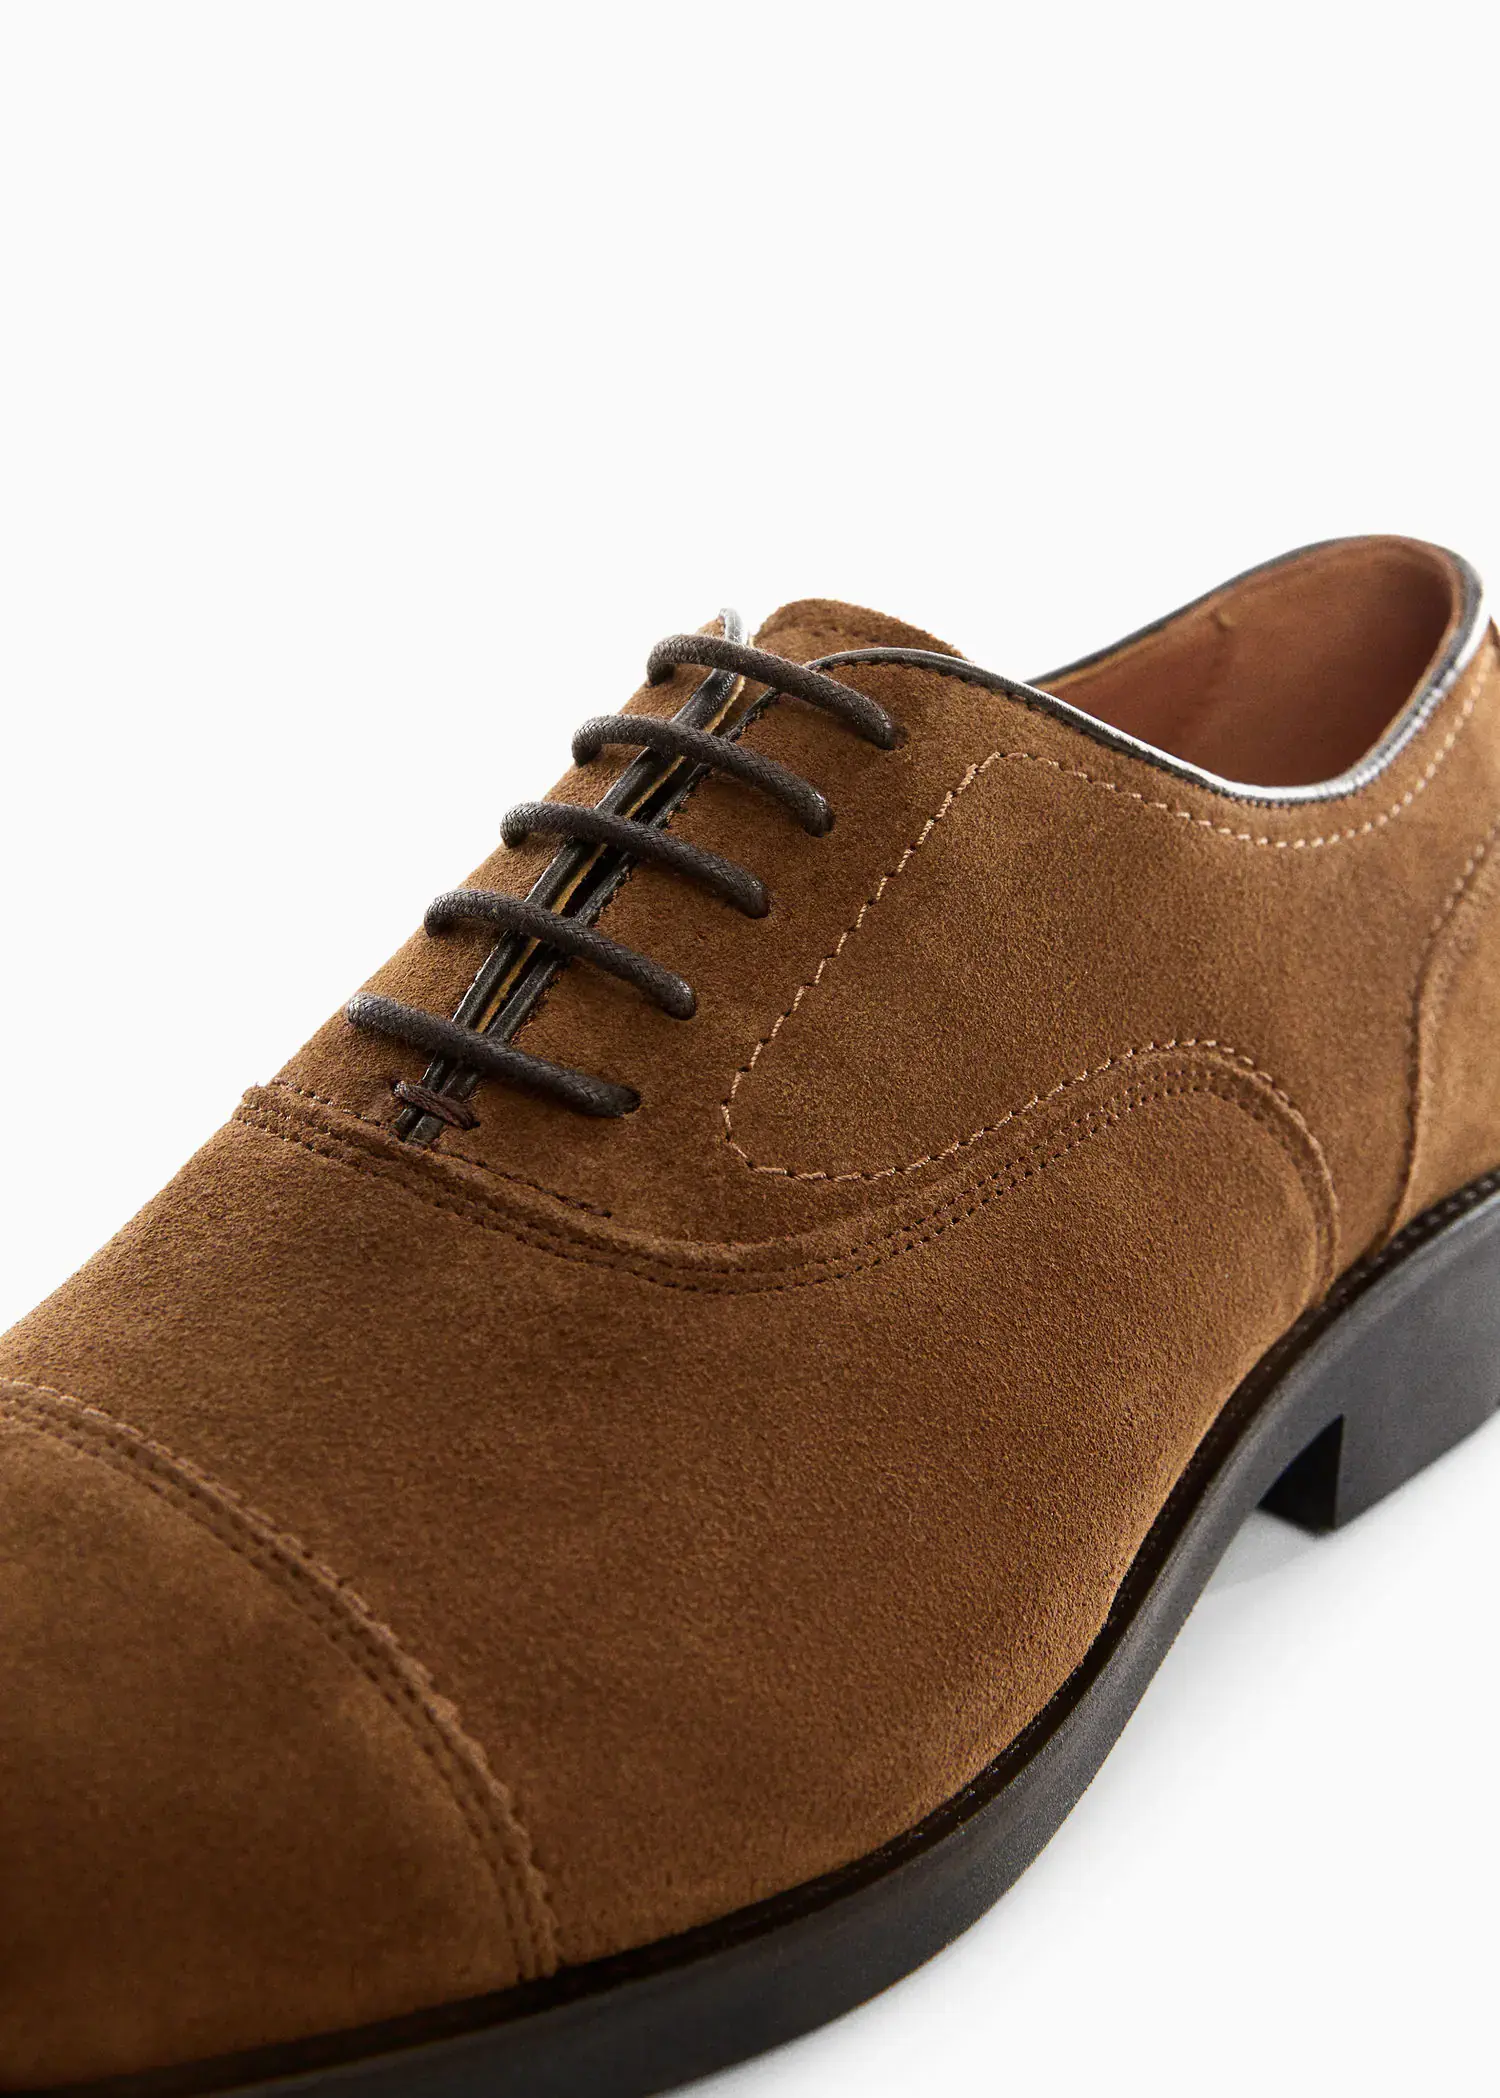 Mango Split leather suit shoes. a close-up view of a pair of brown shoes. 